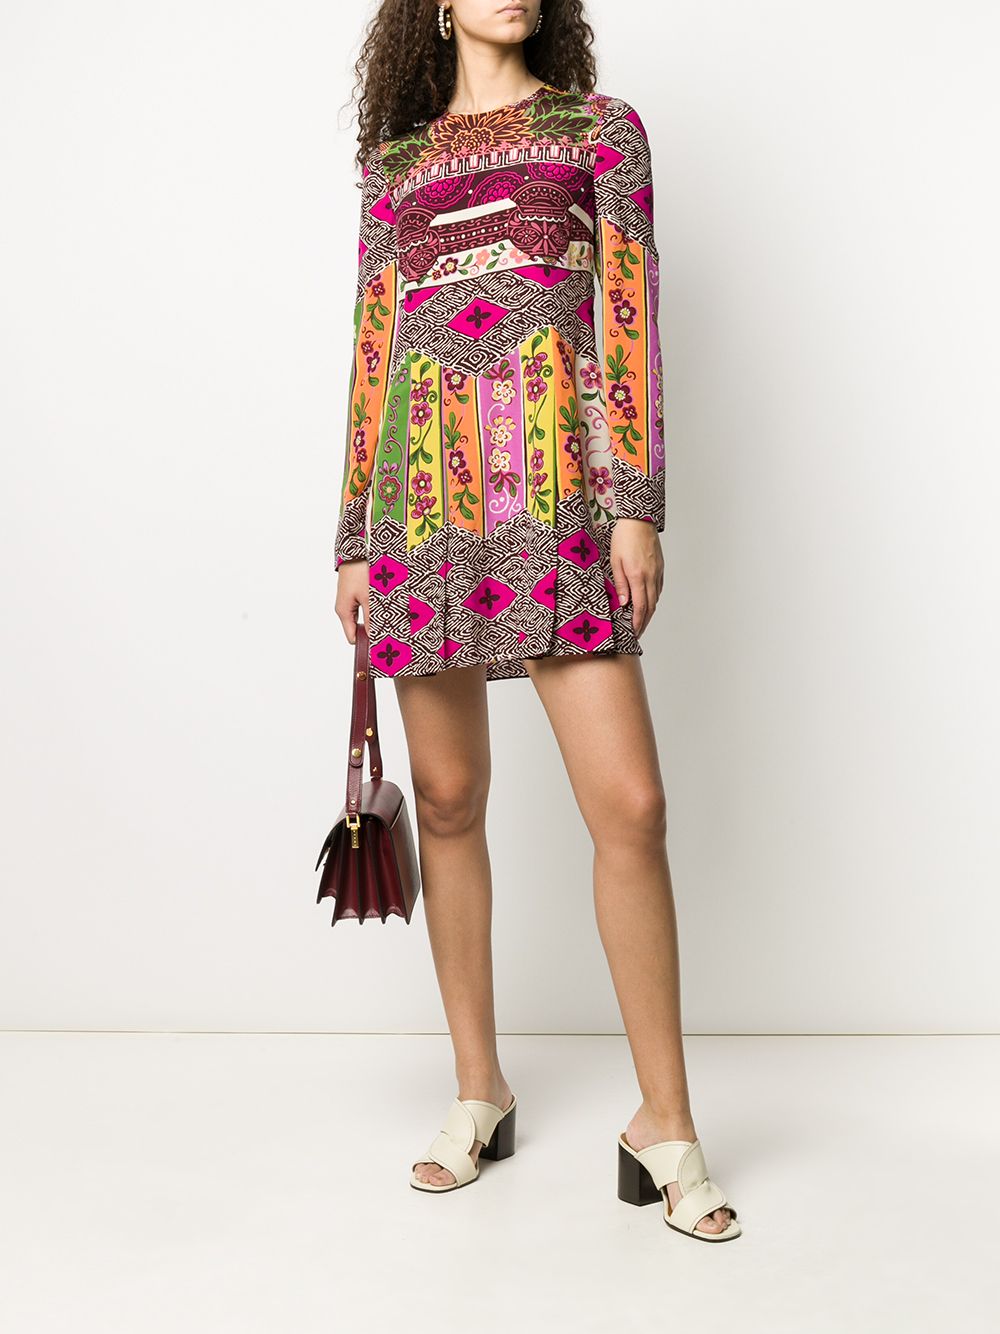 Shop Valentino floral print dress with Express Delivery - FARFETCH